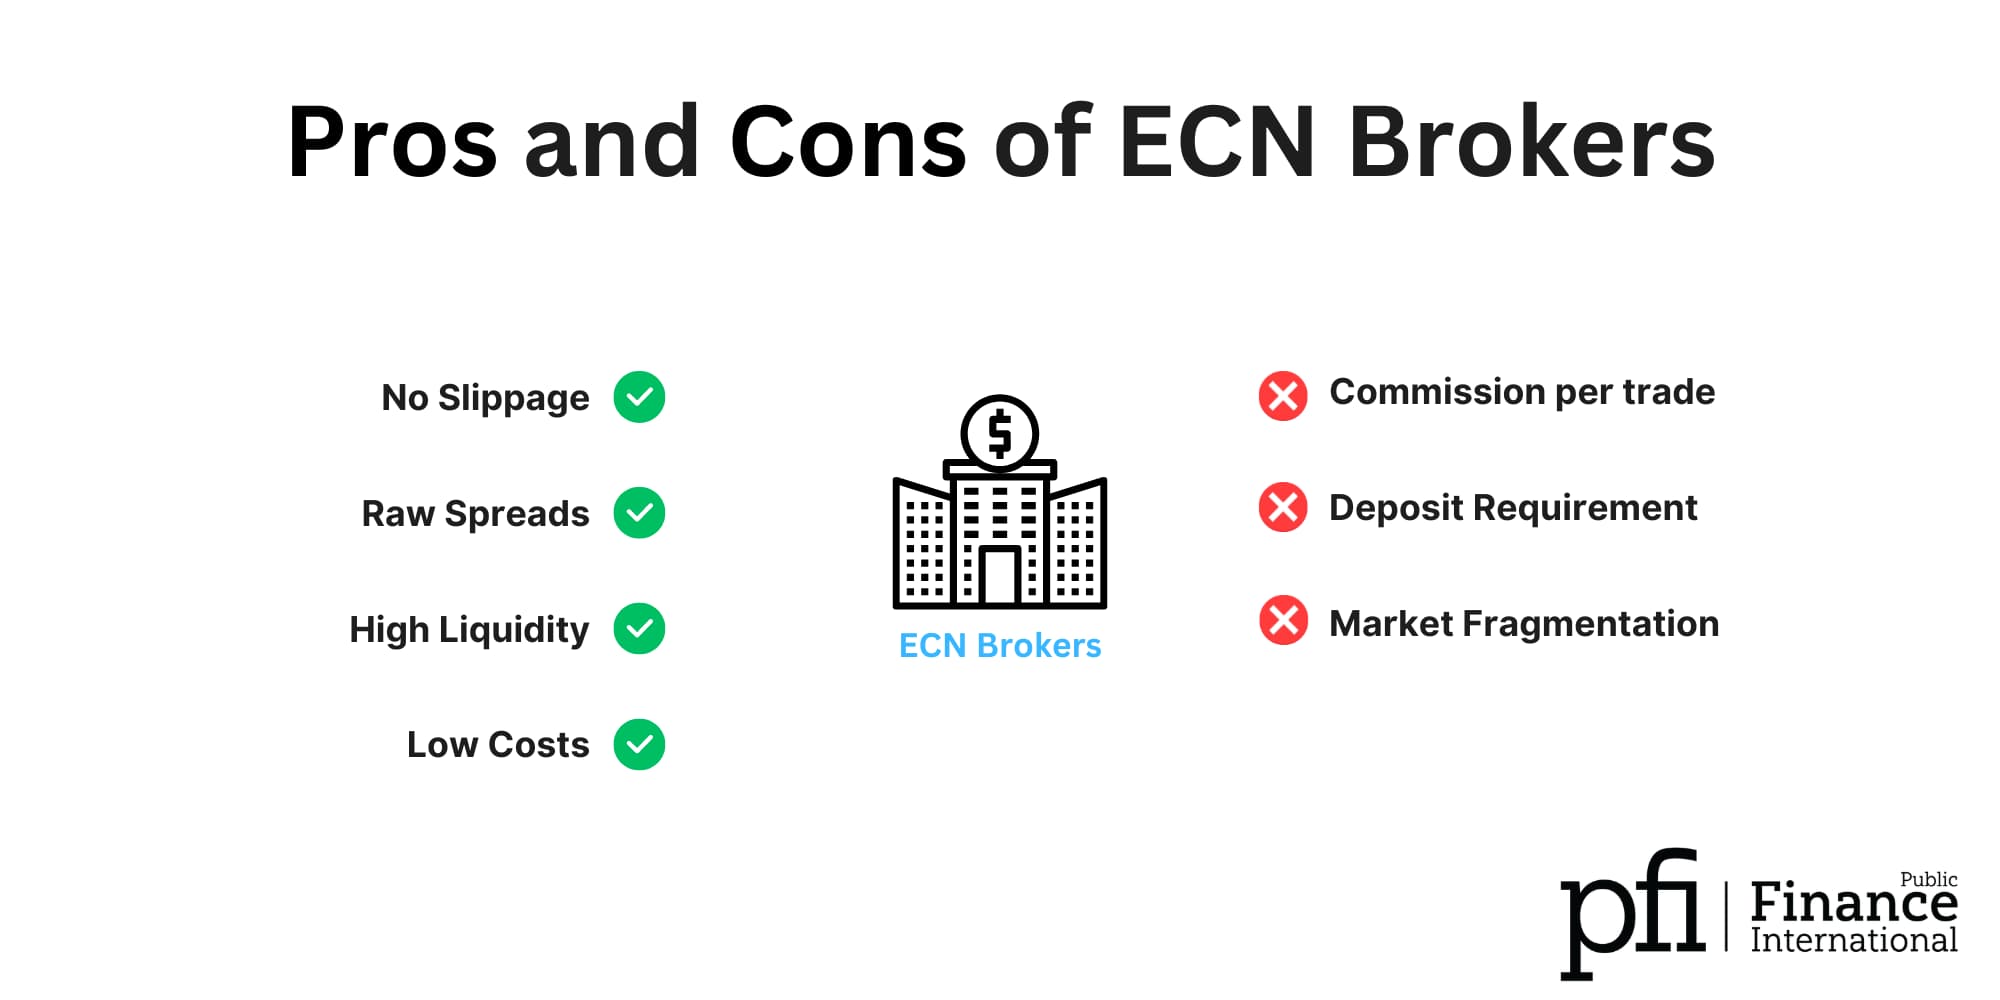 Pros and Cons ECN